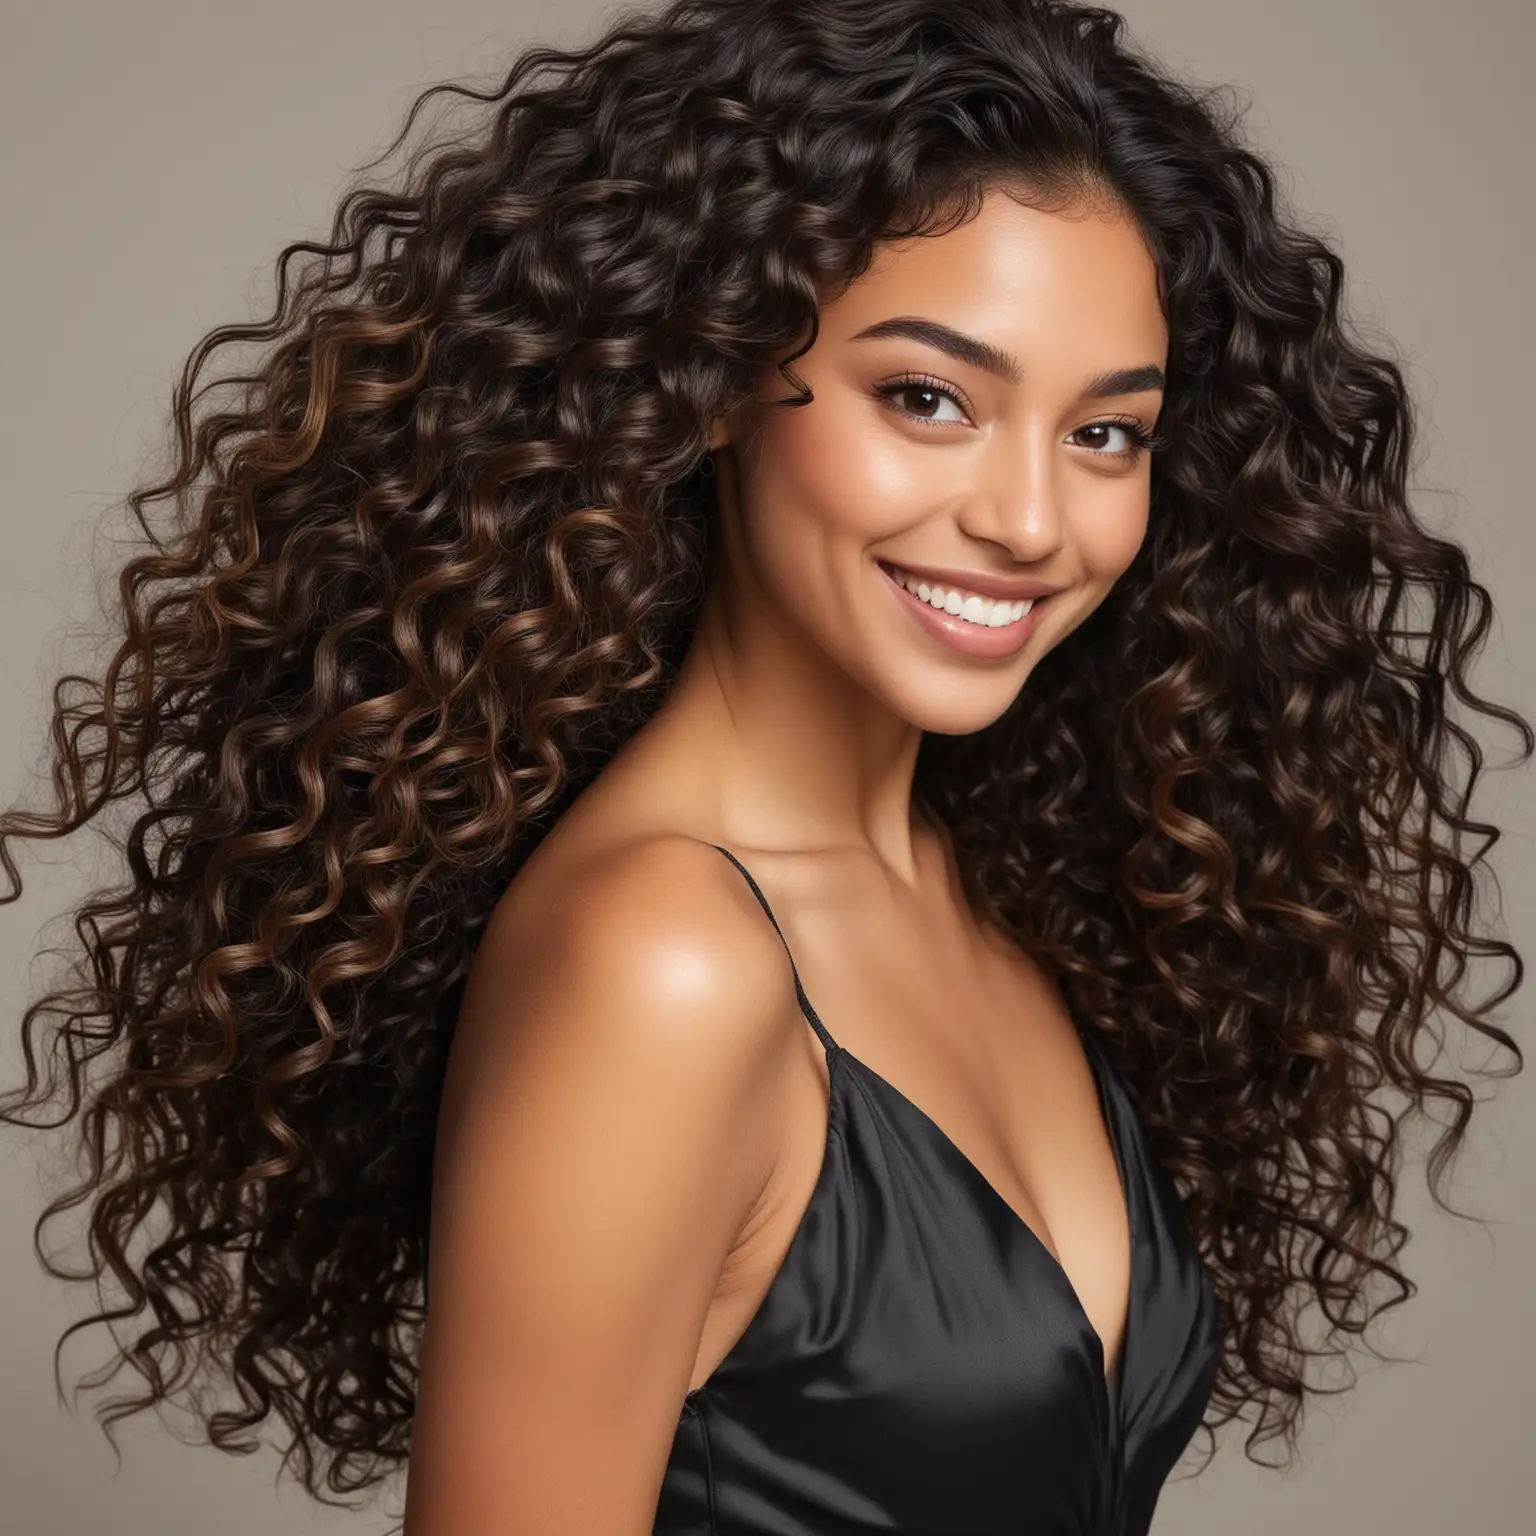 Smiling Woman with Long Natural Curly Hair in Highlighted Balayage Satin Dress